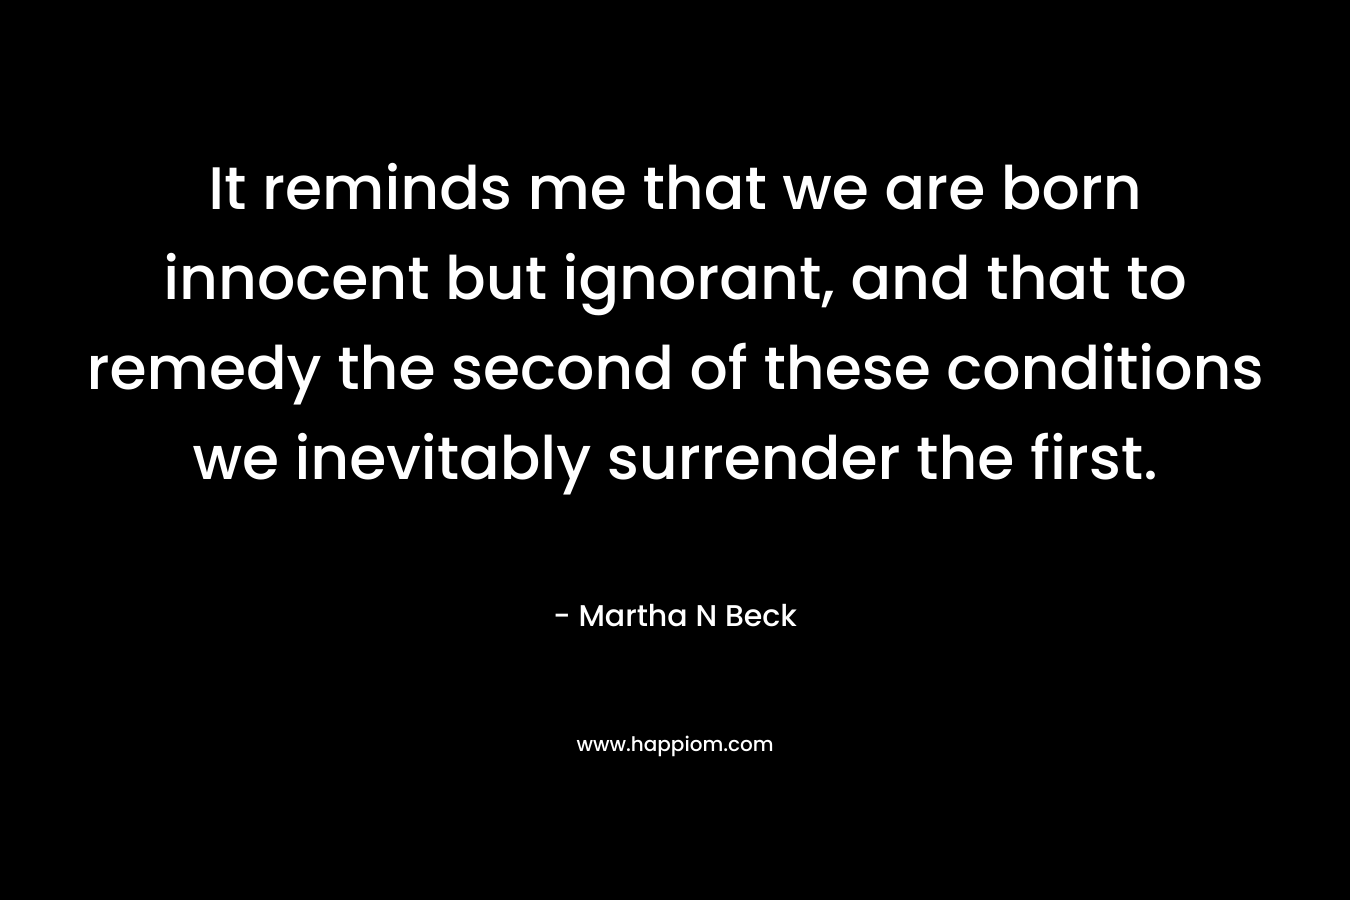 It reminds me that we are born innocent but ignorant, and that to remedy the second of these conditions we inevitably surrender the first. – Martha N Beck